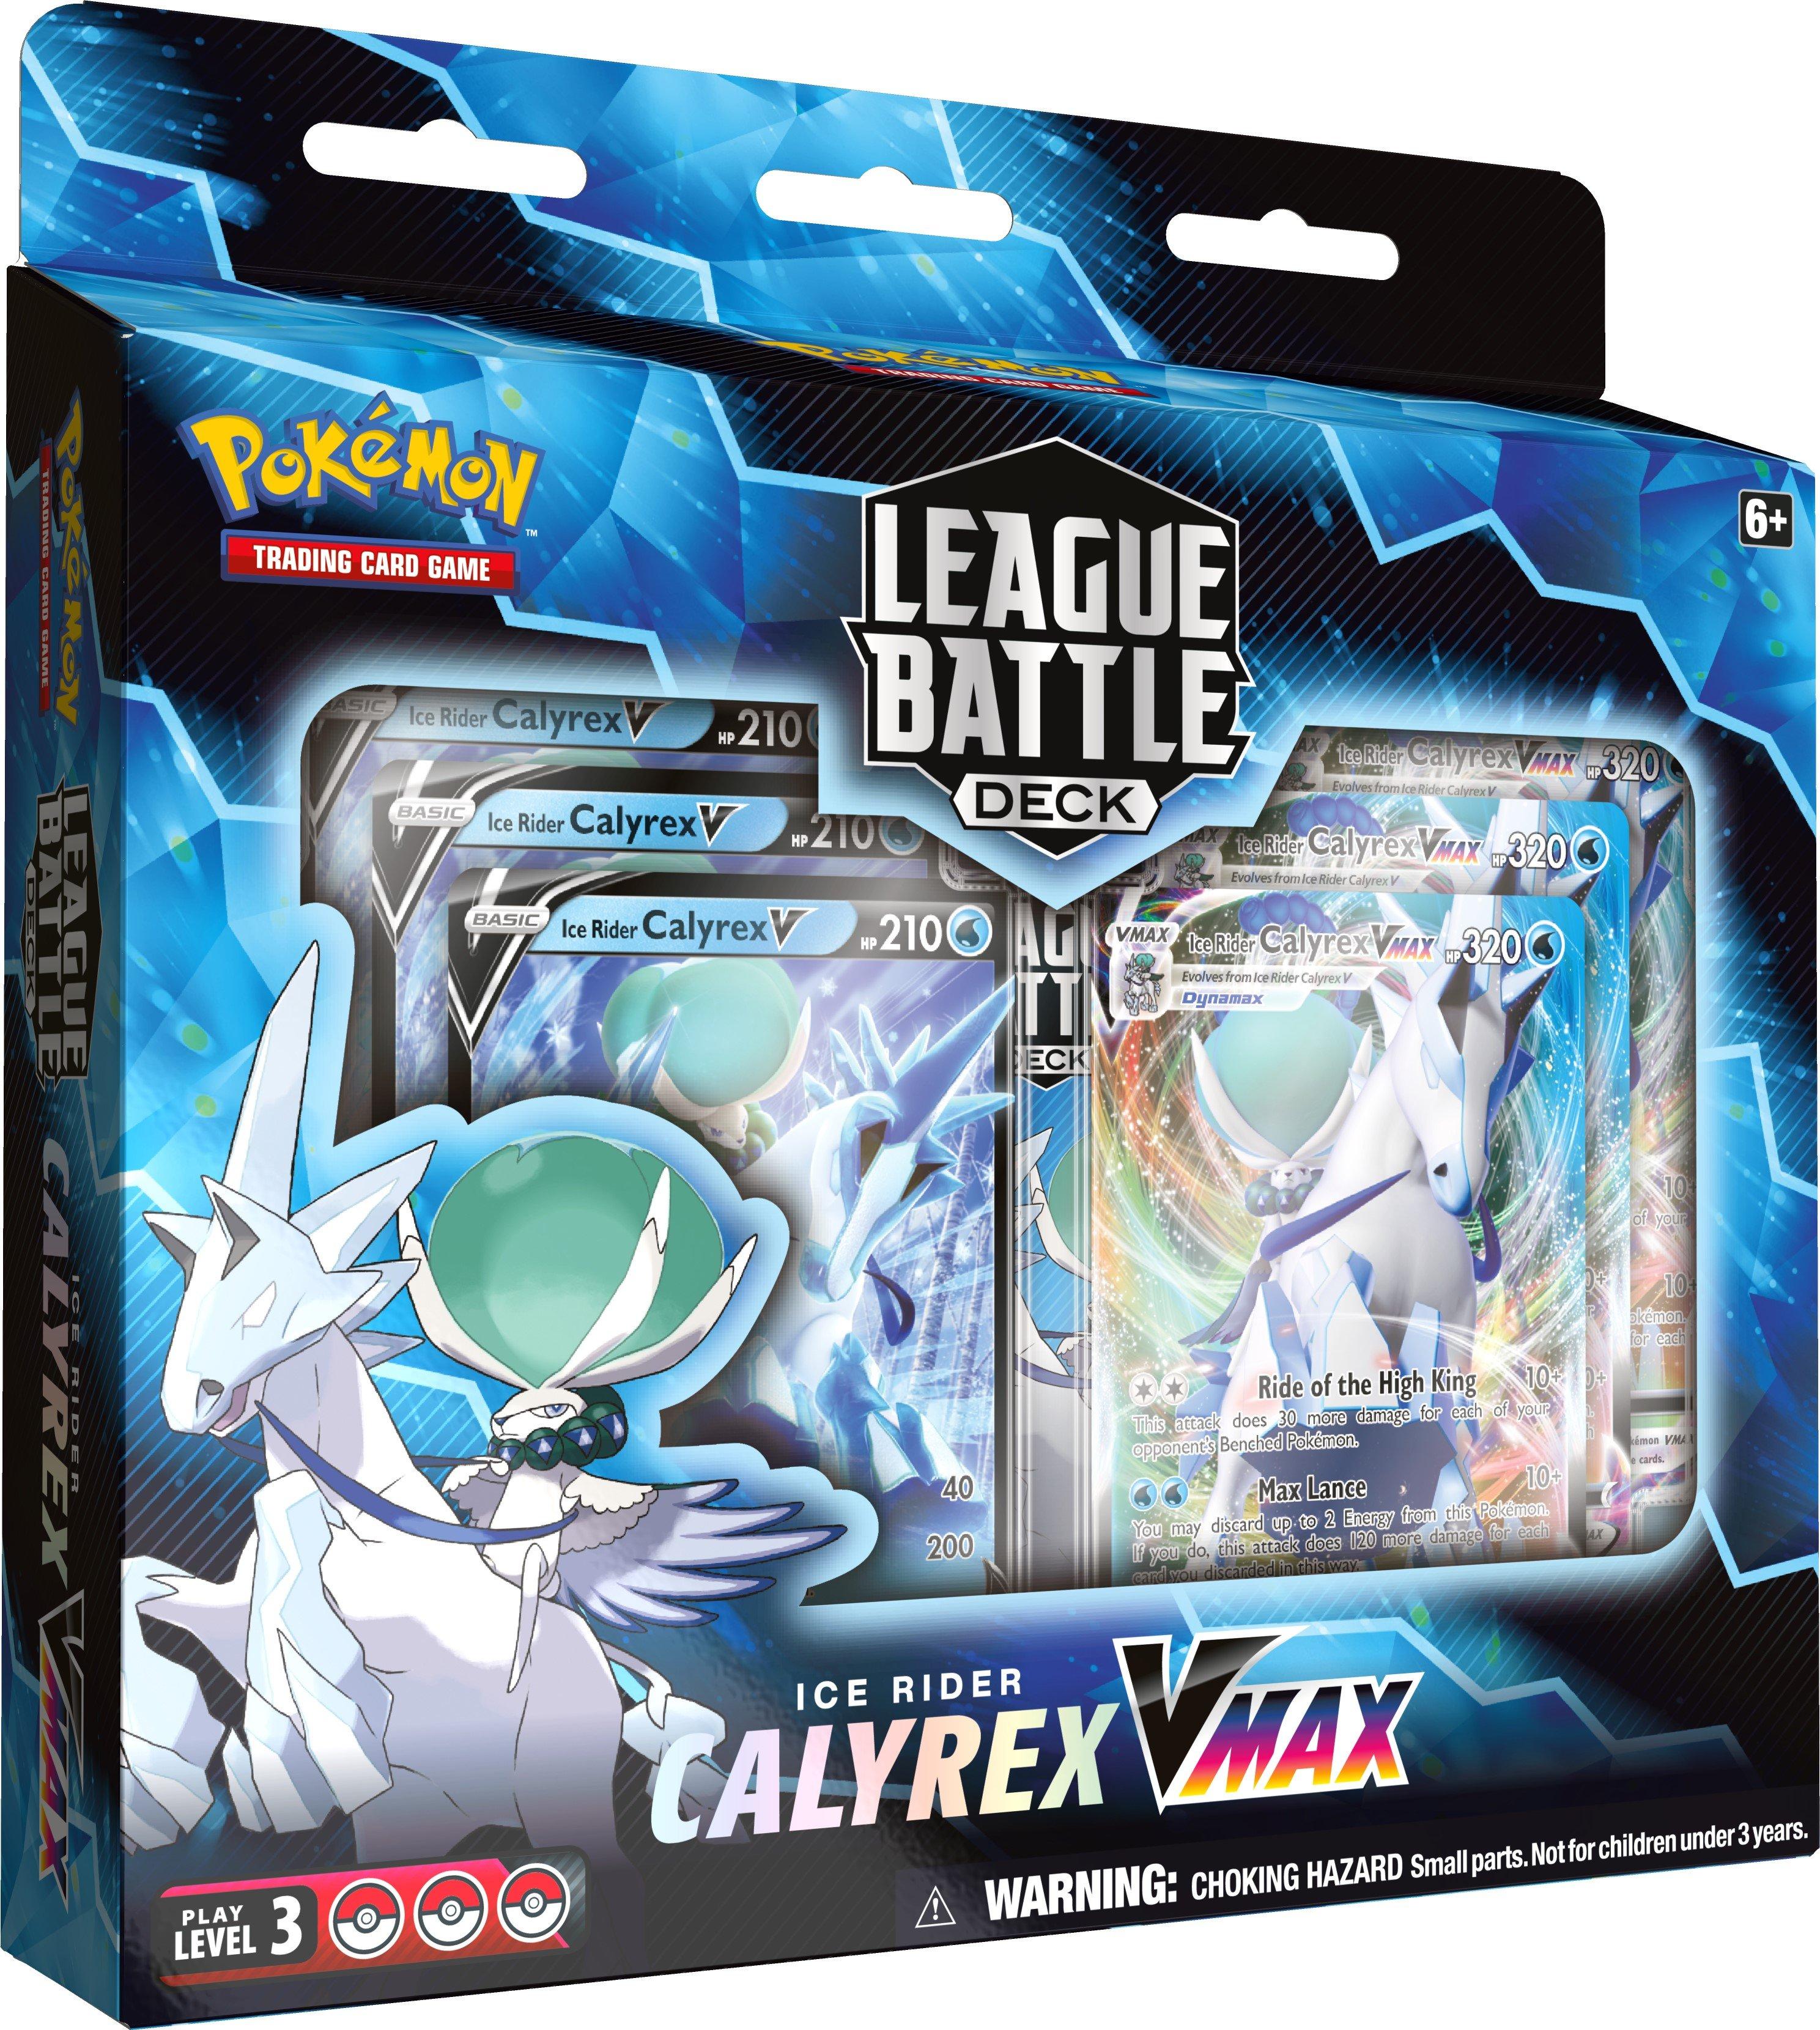 Pokemon Trading Card Game Calyrex VMAX League Battle Deck (Styles May Vary)